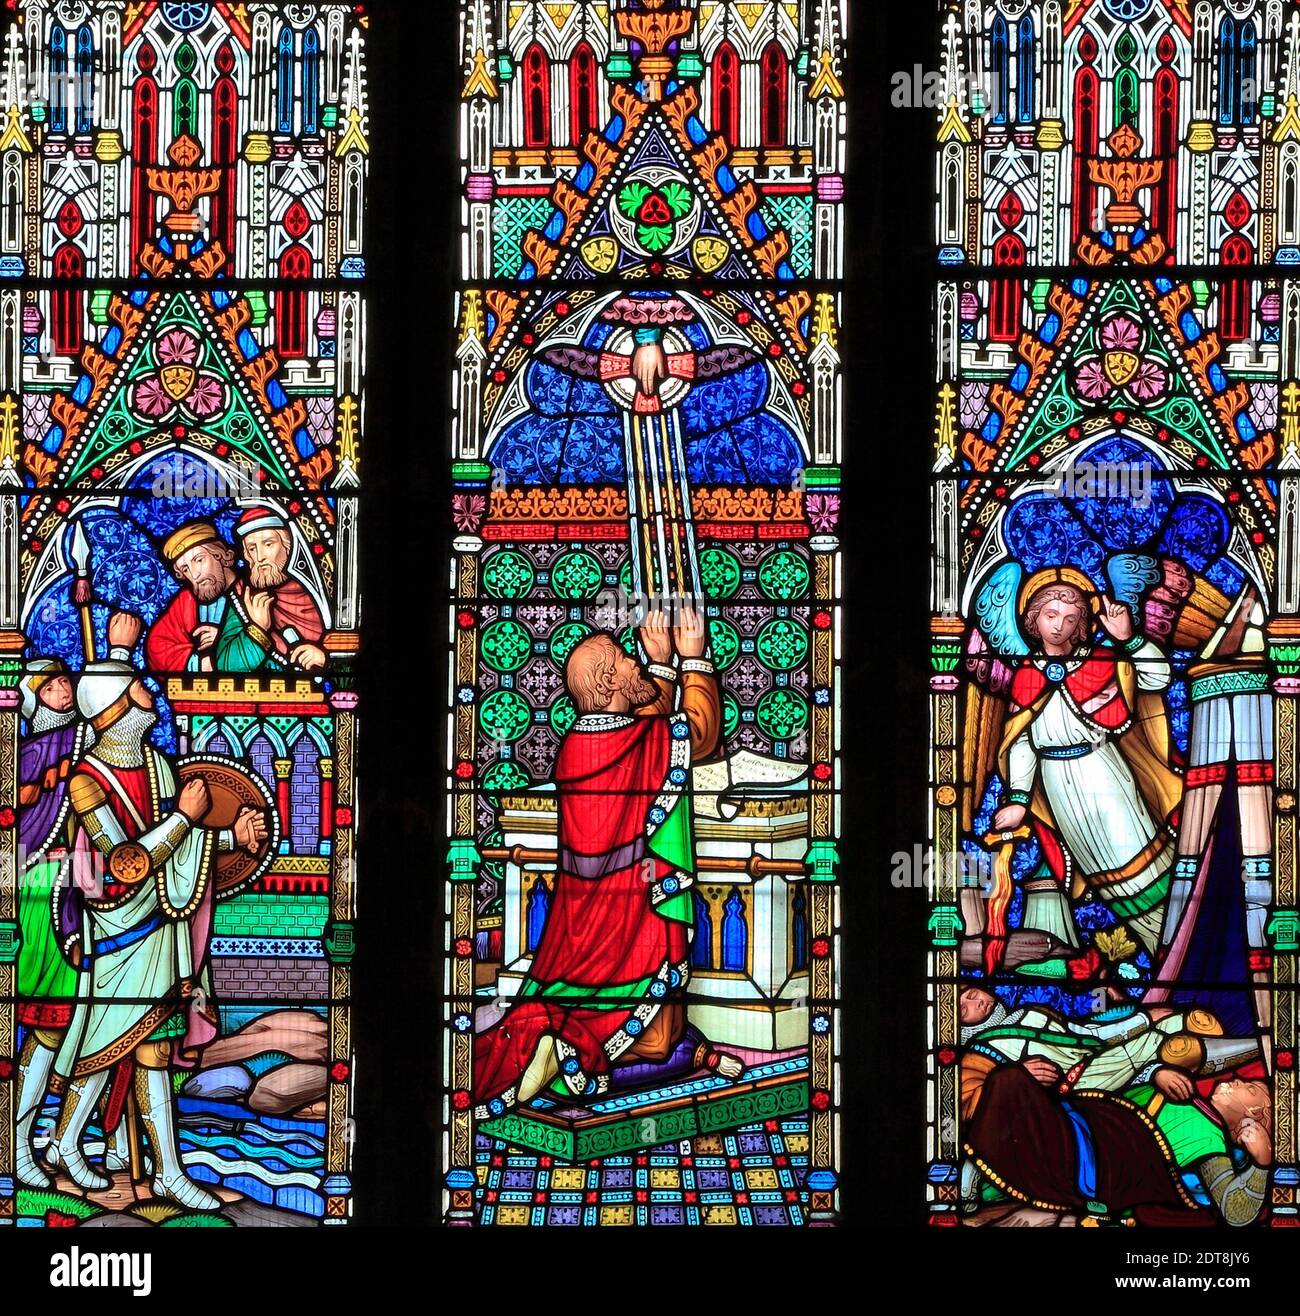 Stained glass window, King Hezekiah, and the Assyrians, by William Wailes, mid 19th century, Ely Cathedral, Cambridgeshire, England Stock Photo